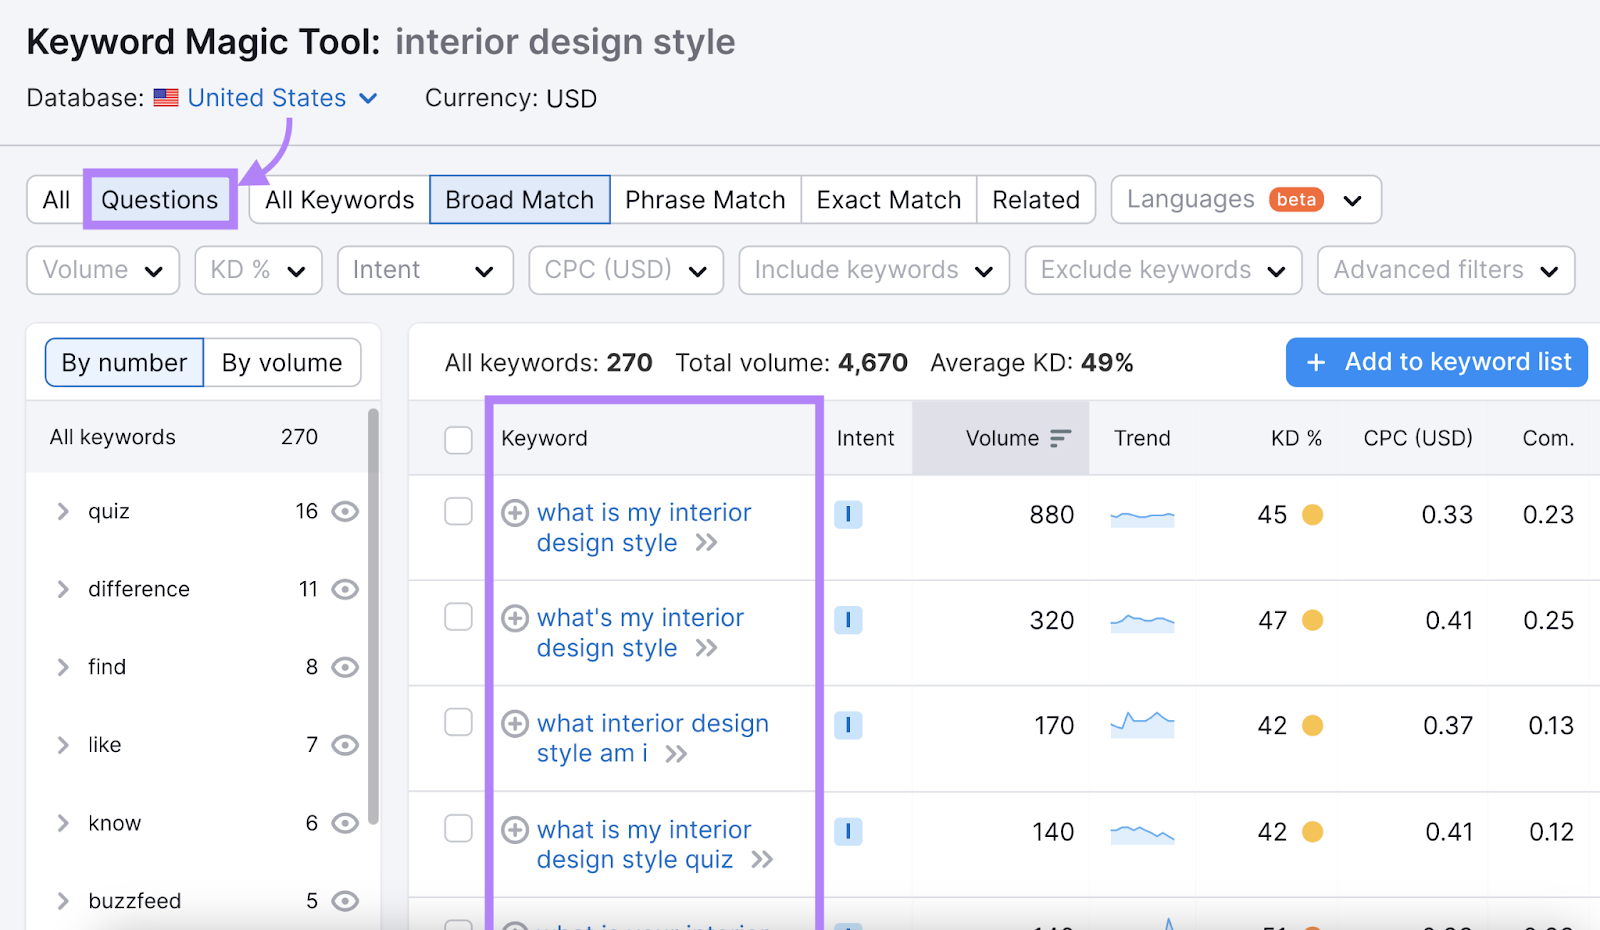 "Questions" keywords related to "interior design style" found in Keyword Magic Tool